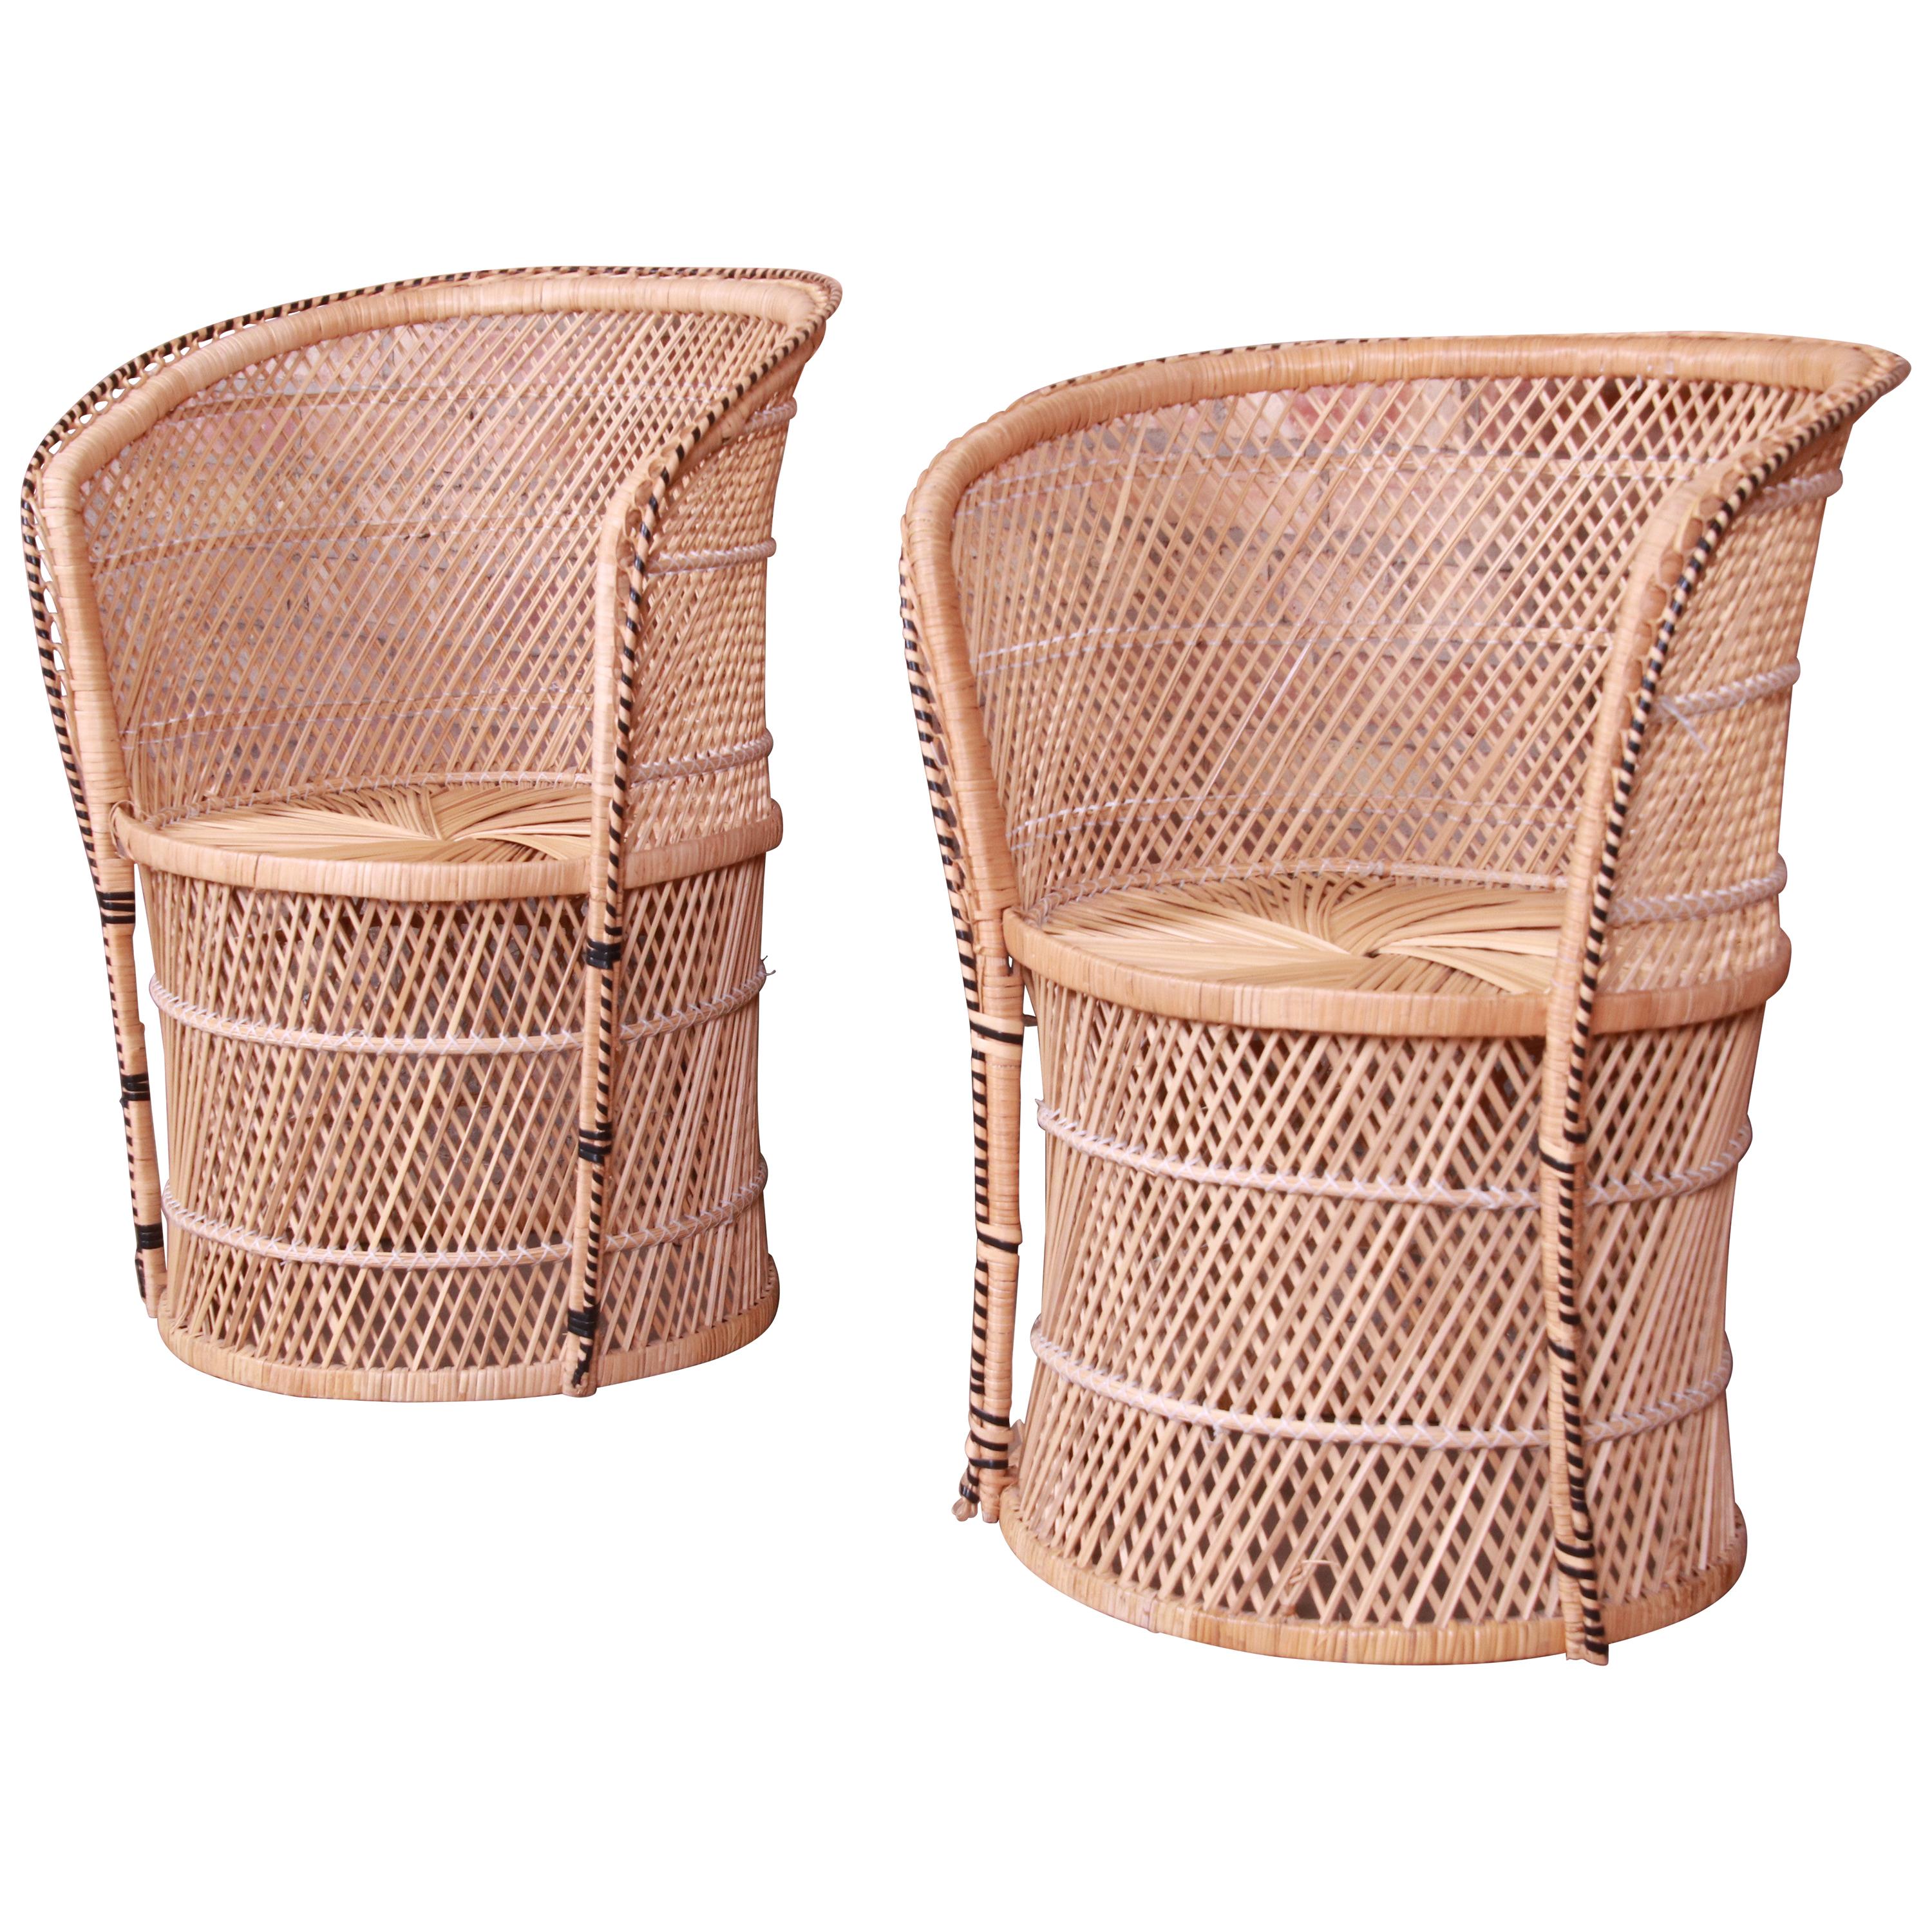 Pair of Organic Modern Wicker and Rattan Club Chairs